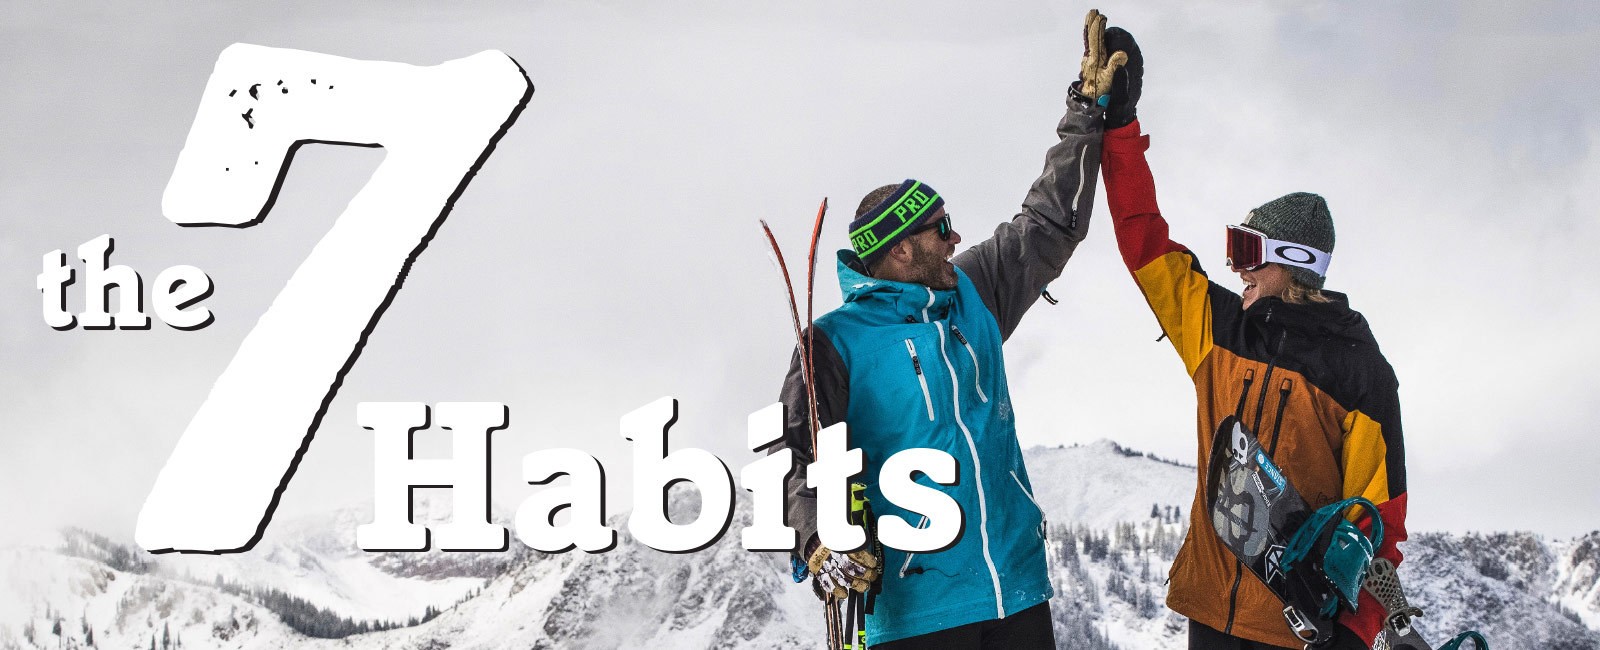 The 7 Habits of Skiers: Think Win/Win